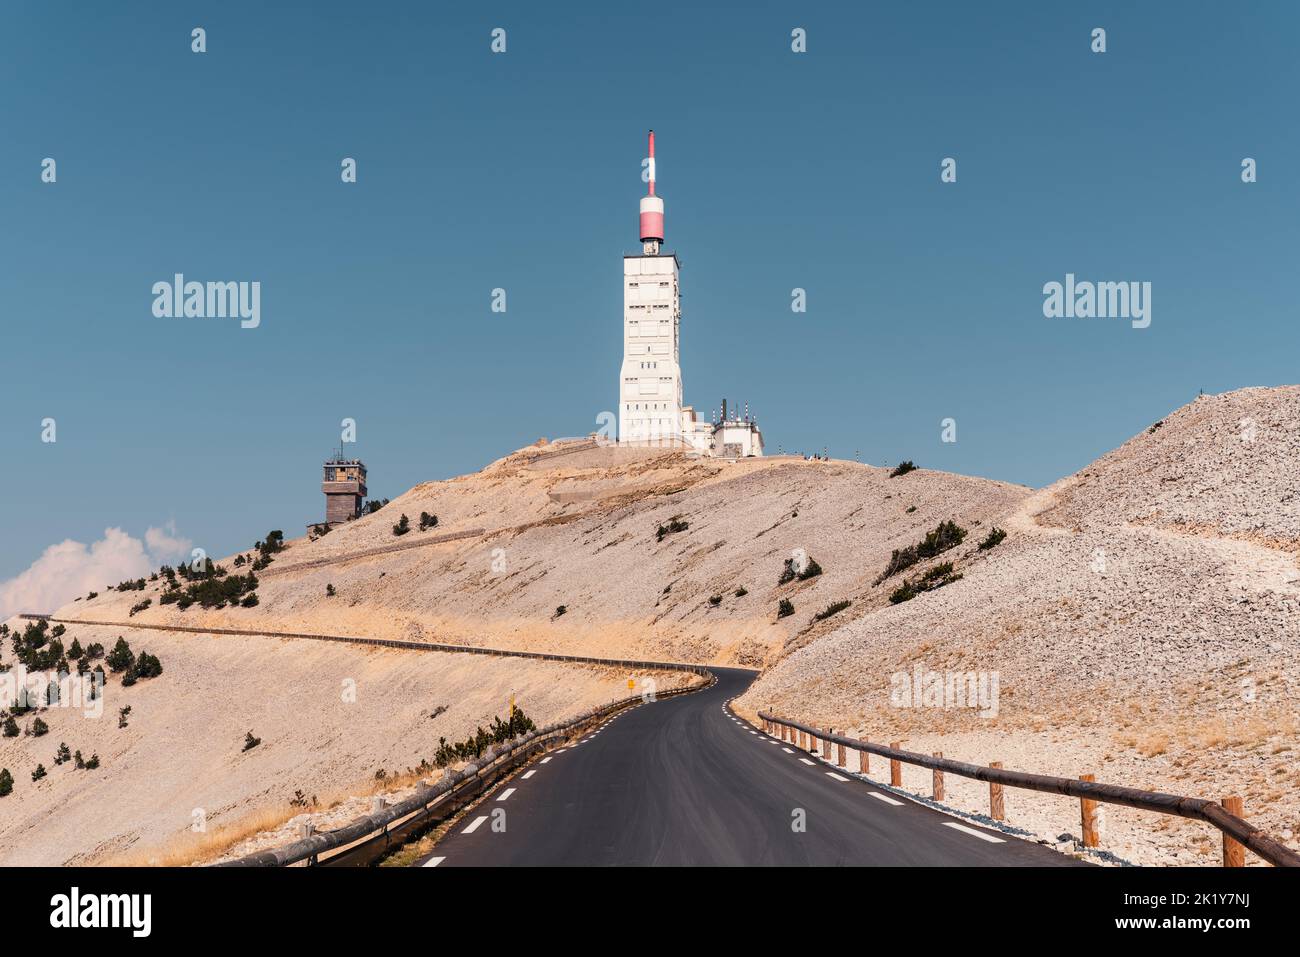 Mont Ventoux. Mountain in the Provence region of southern France, elevation 1,909 m, 6,263 ft. Famous climb in the Tour de France bicycle race. Stock Photo